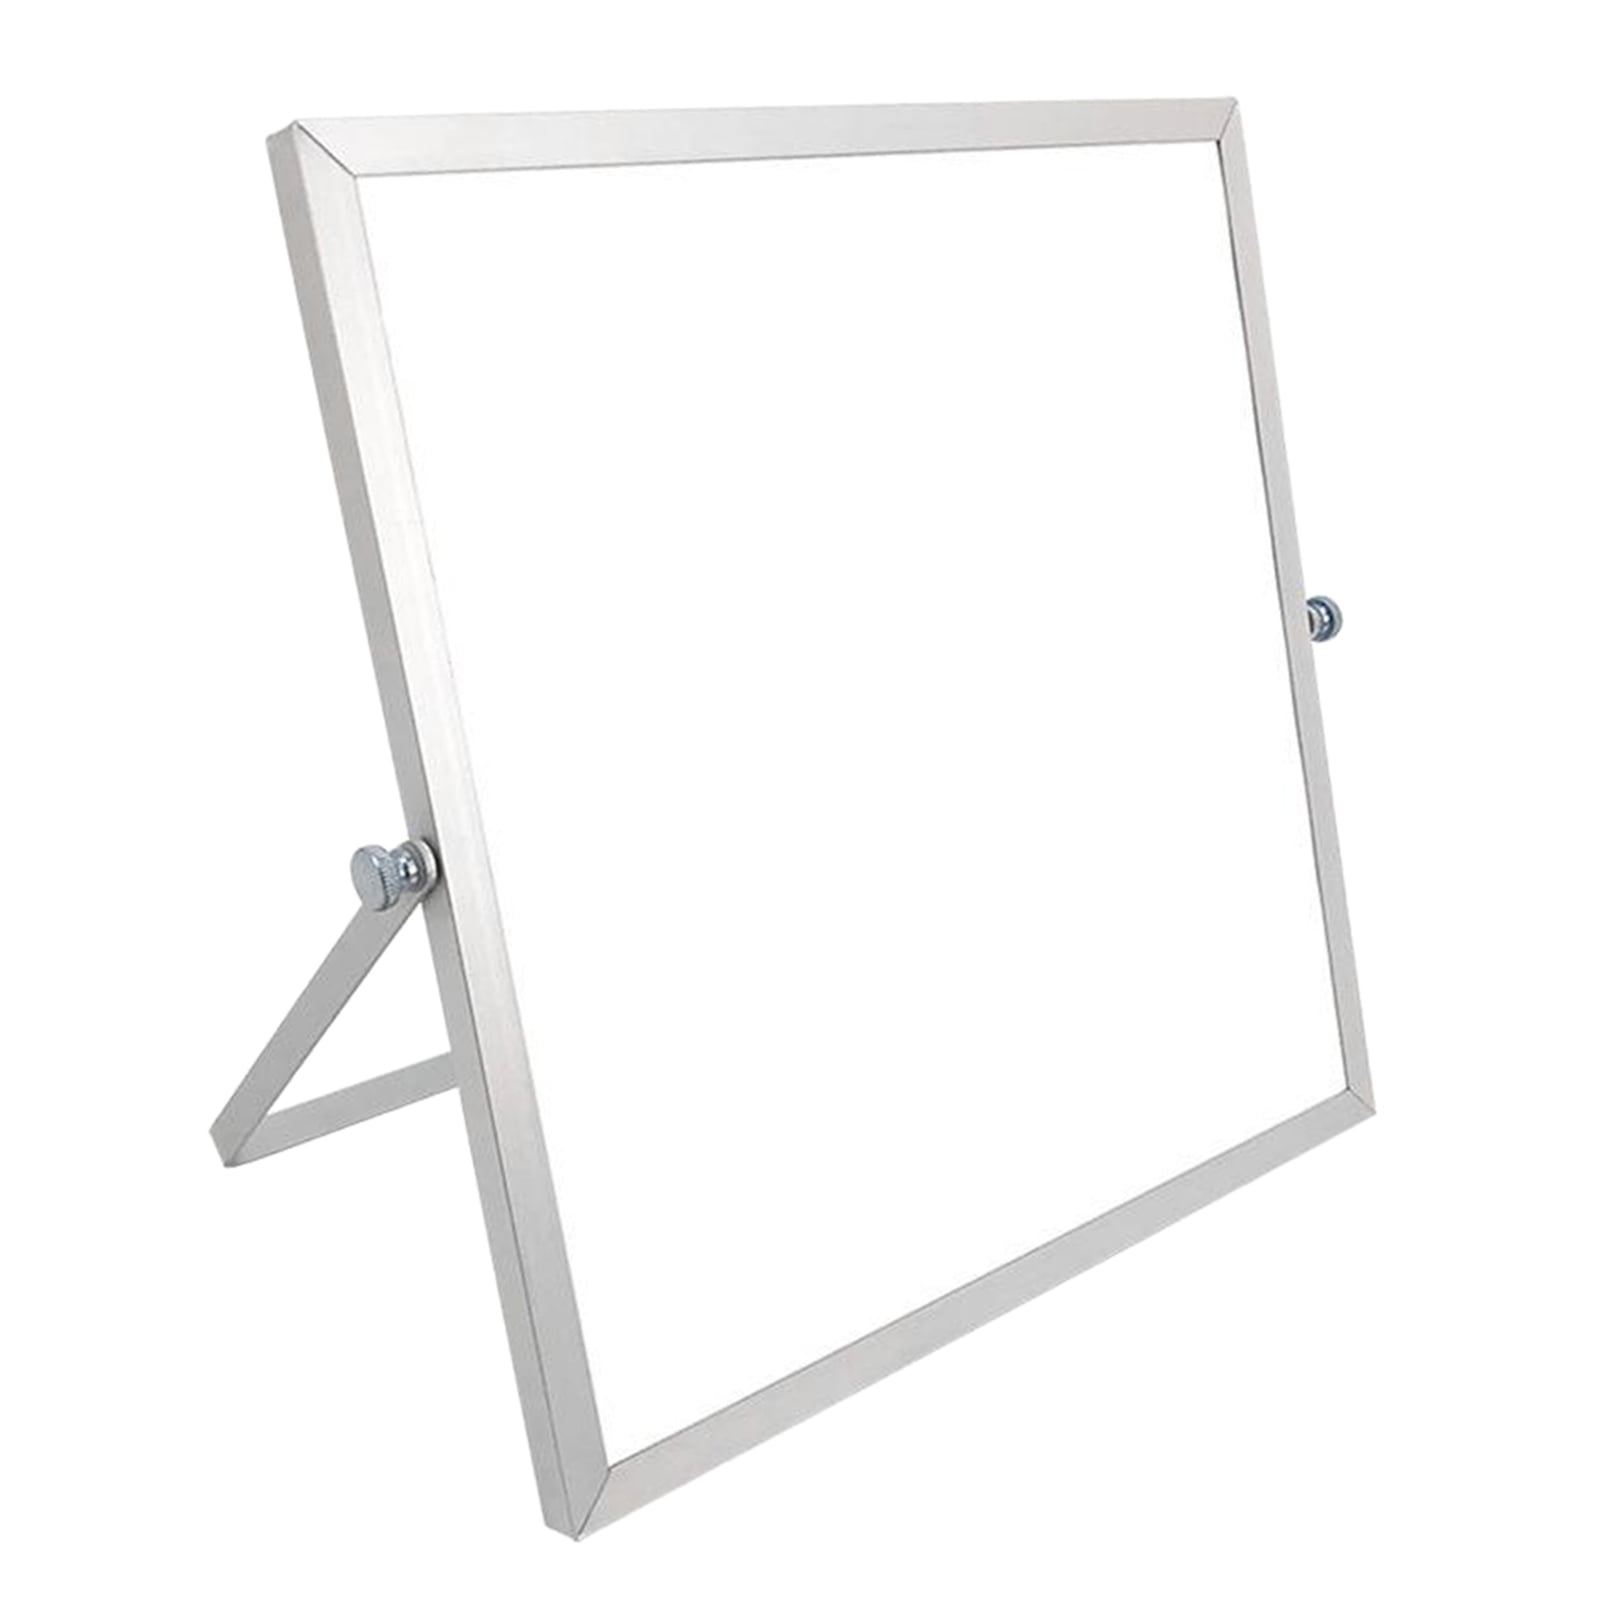 Details about   XIWODE Magnetic Dry Erase Board 90cm x 60cm|White Wall Mounted Whiteboard, 